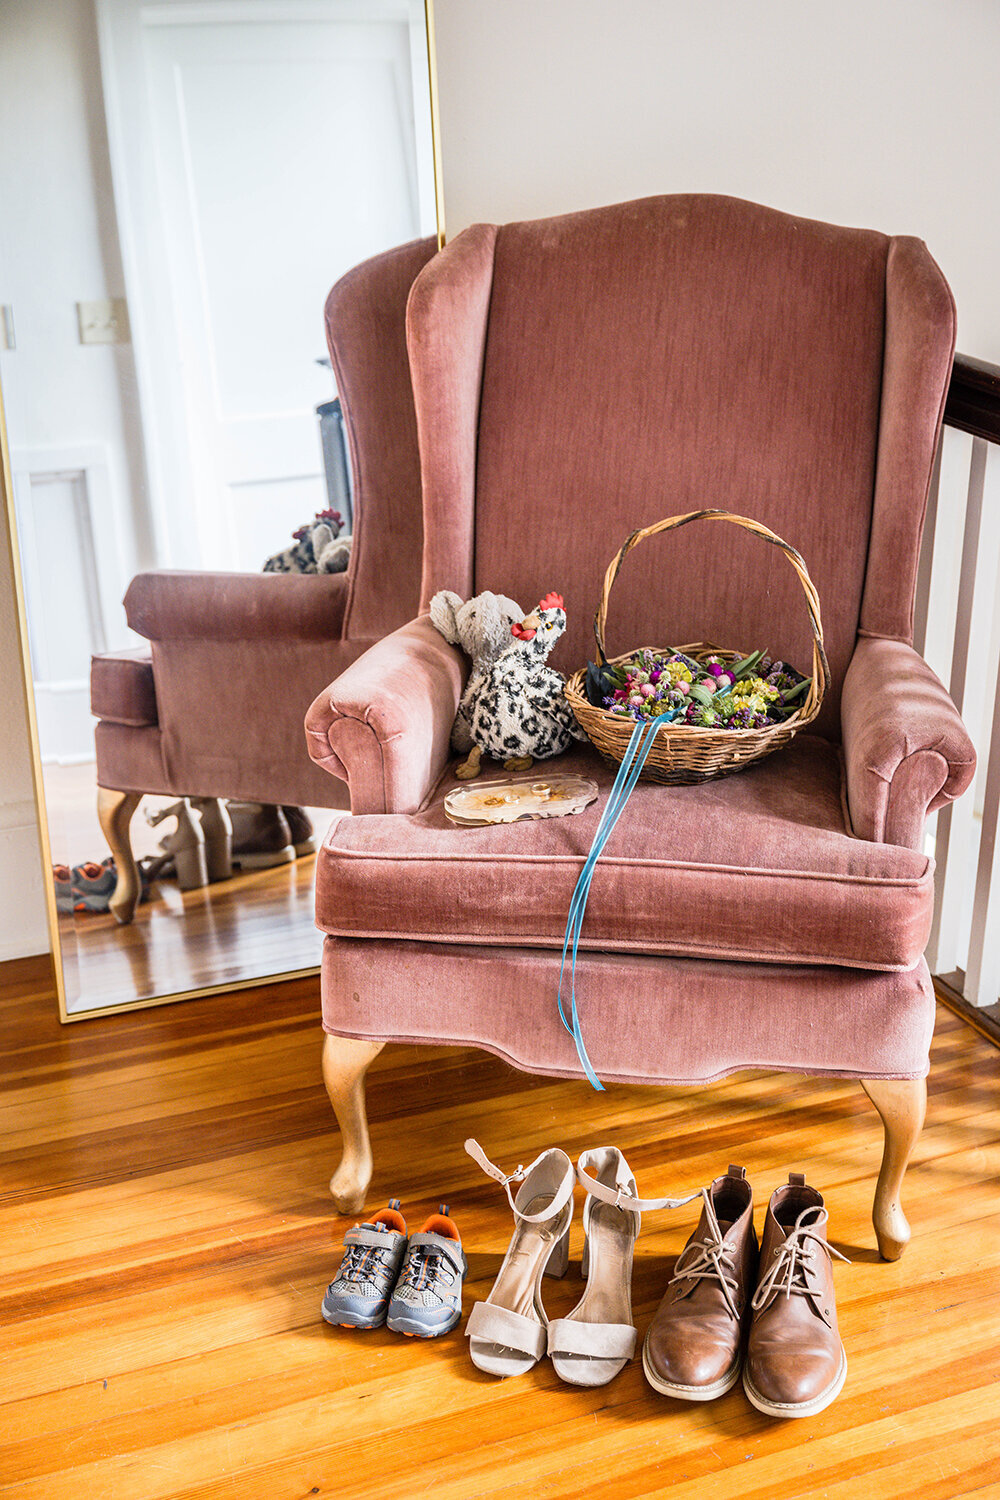 A pink antique chair sits in front of a mirror and holds a basket with three flower crowns, a ring dish with two rings, and two stuffed animals, a chicken and an elephant. In front of the chair on the wood floor are three pairs of shoes, growing in size as you look from left to right. The first pair is a pair of toddler hiking shoes, the second is a pair of high heels, and the third is a pair of brown dress shoes.